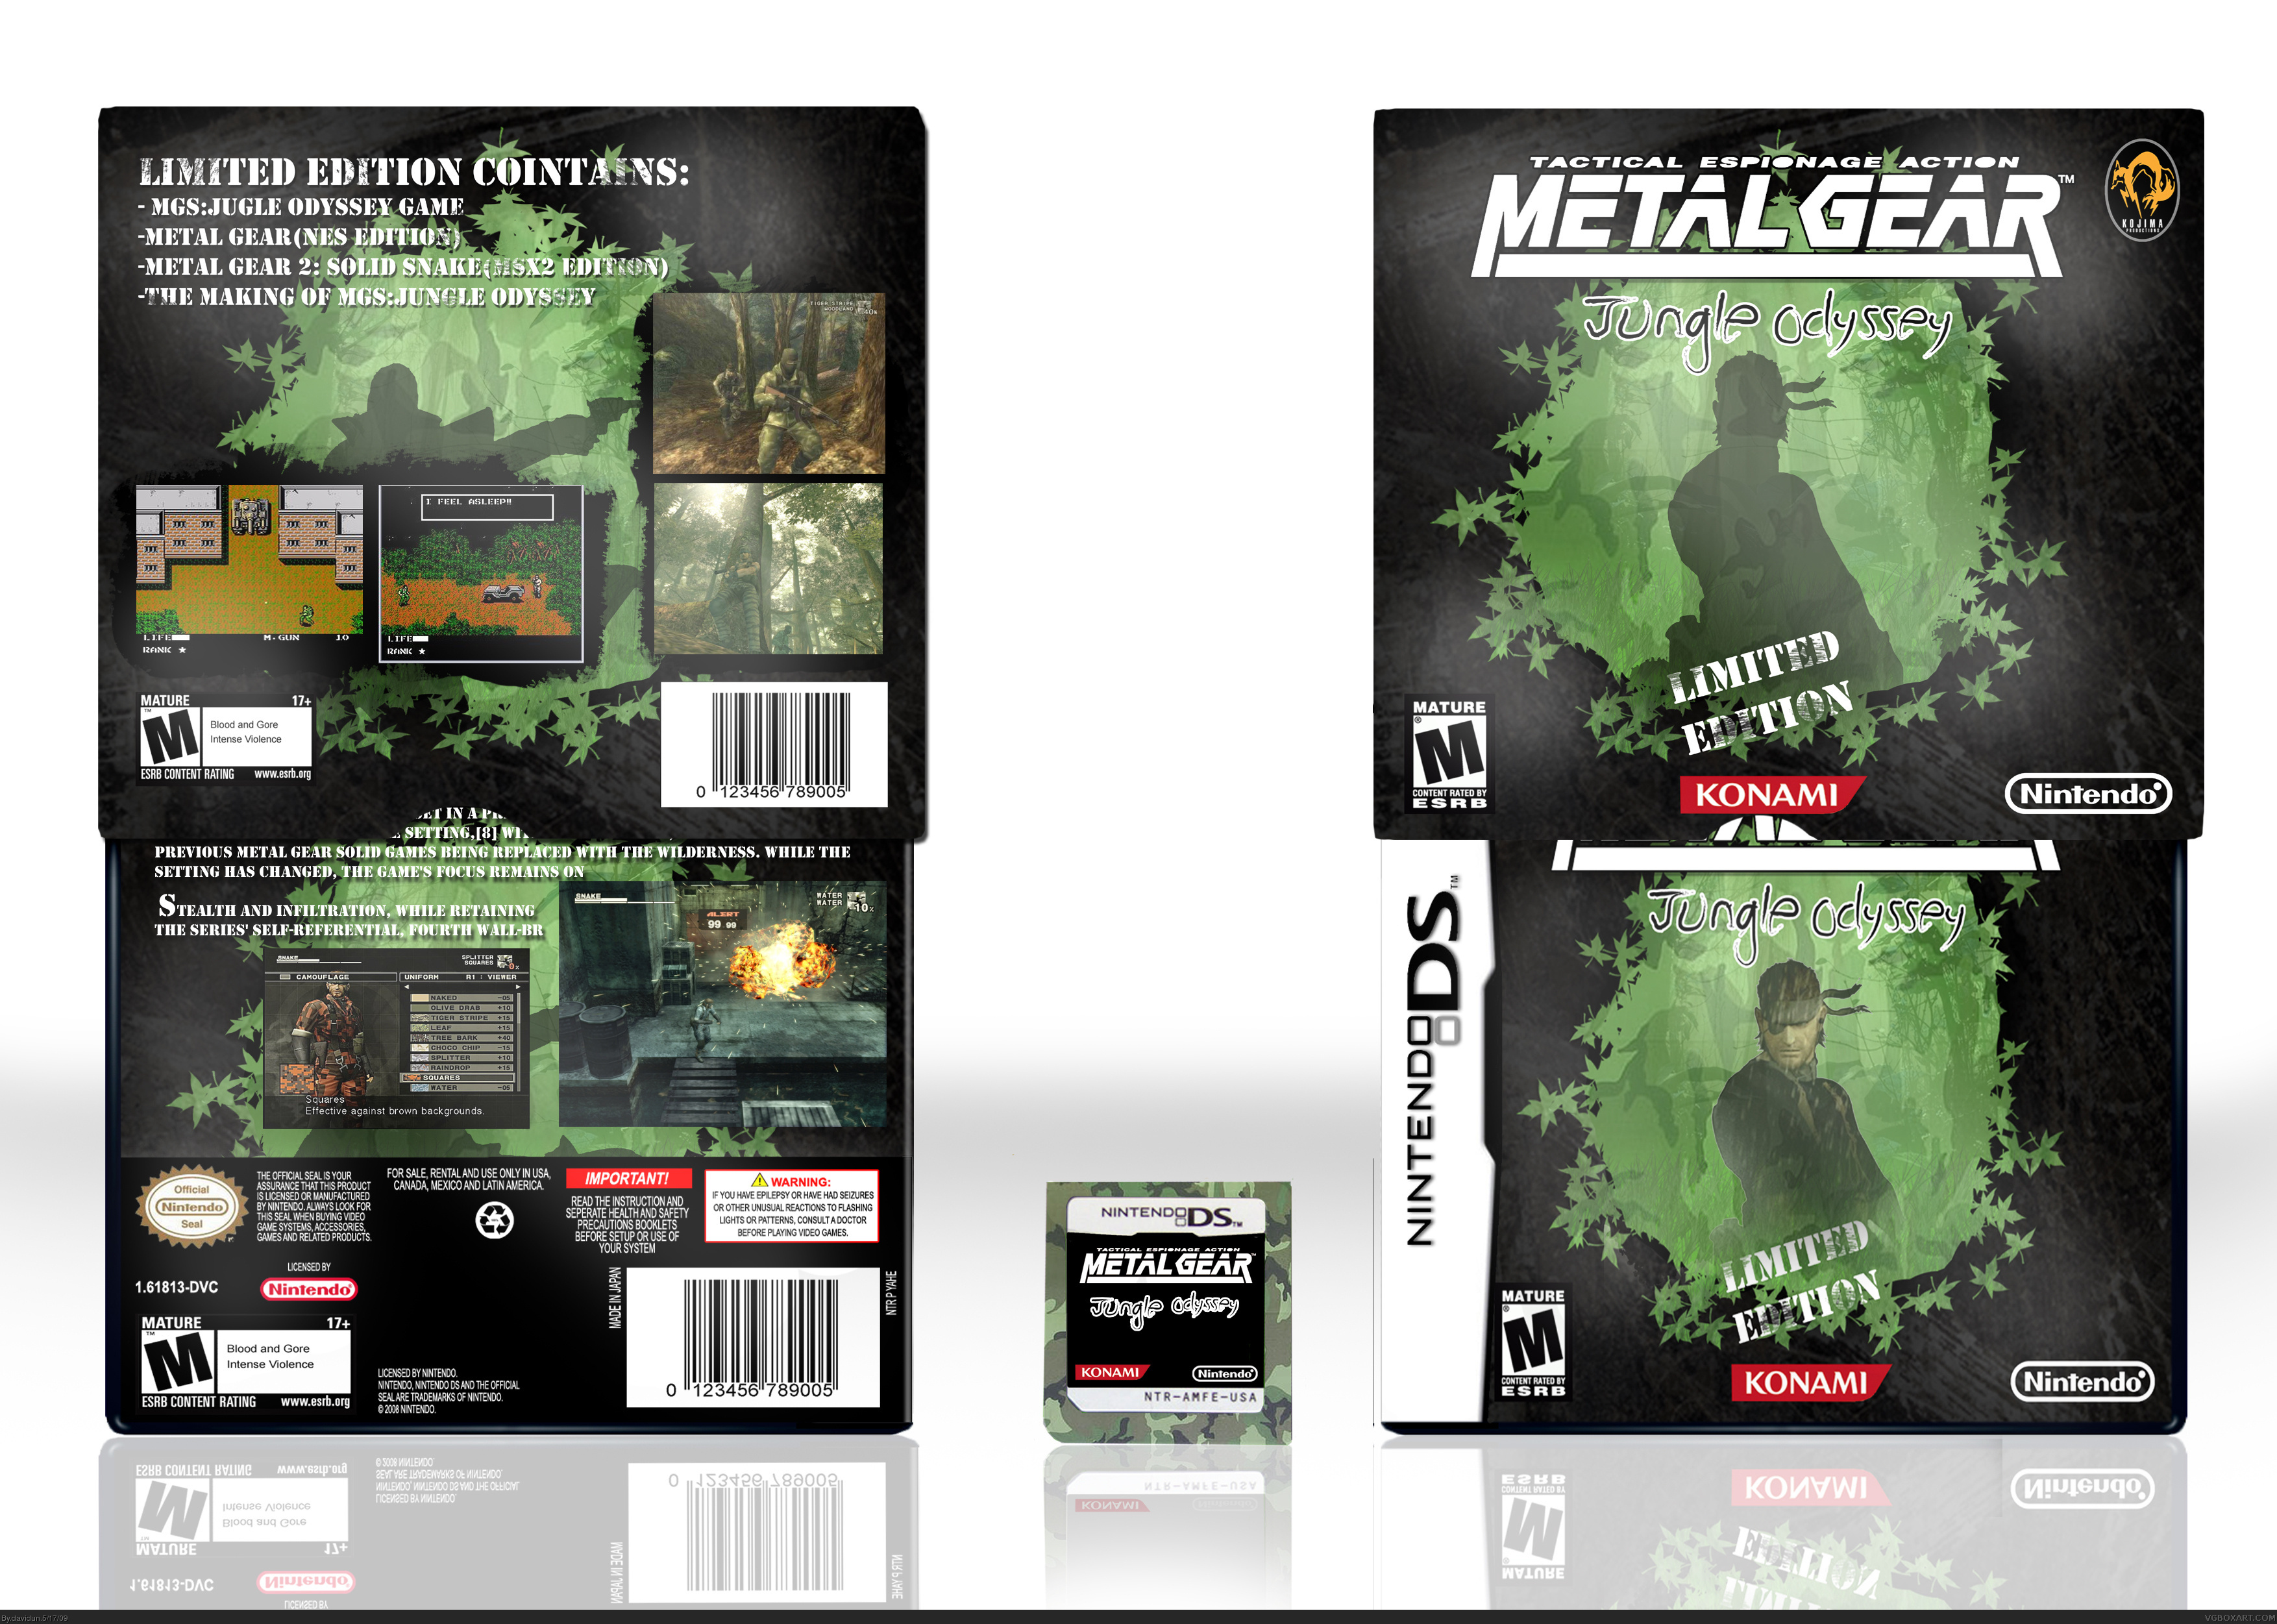 Metal Gear Solid: Jungle Odyssey box cover